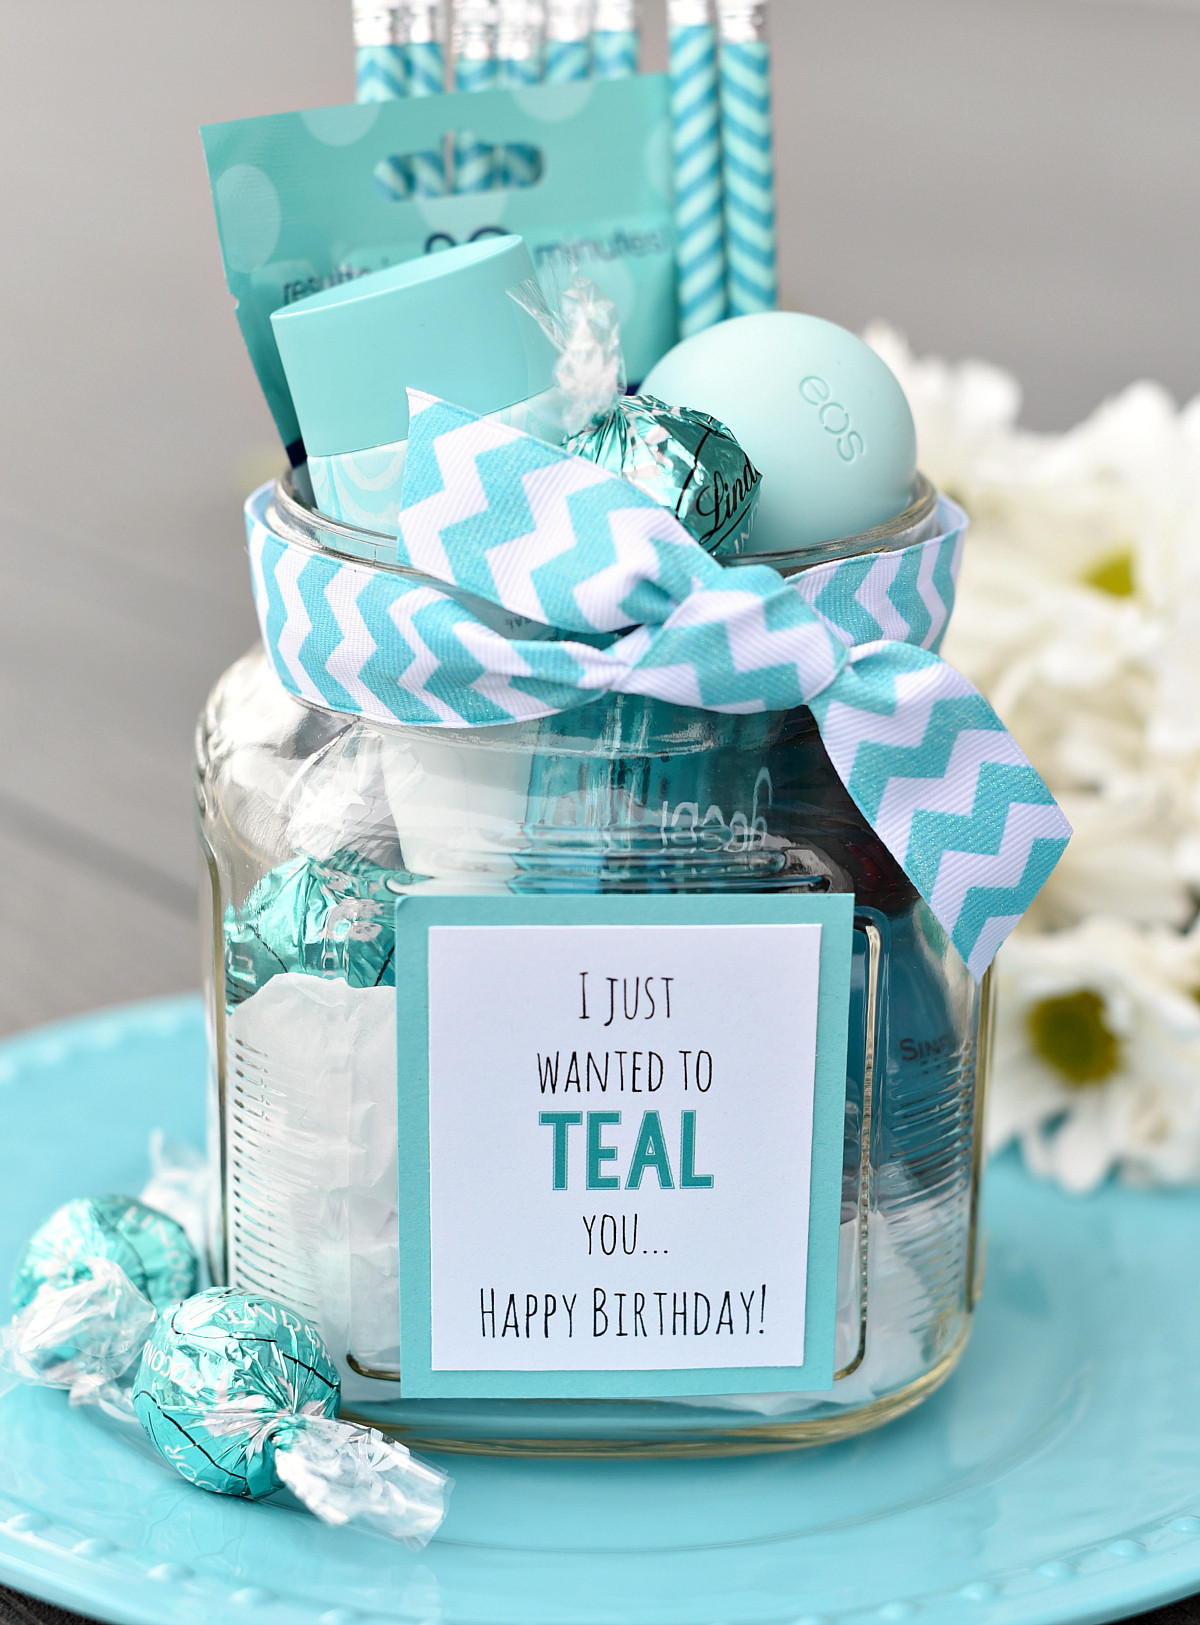 Best Friend Birthday Gift
 Teal Birthday Gift Idea for Friends – Fun Squared